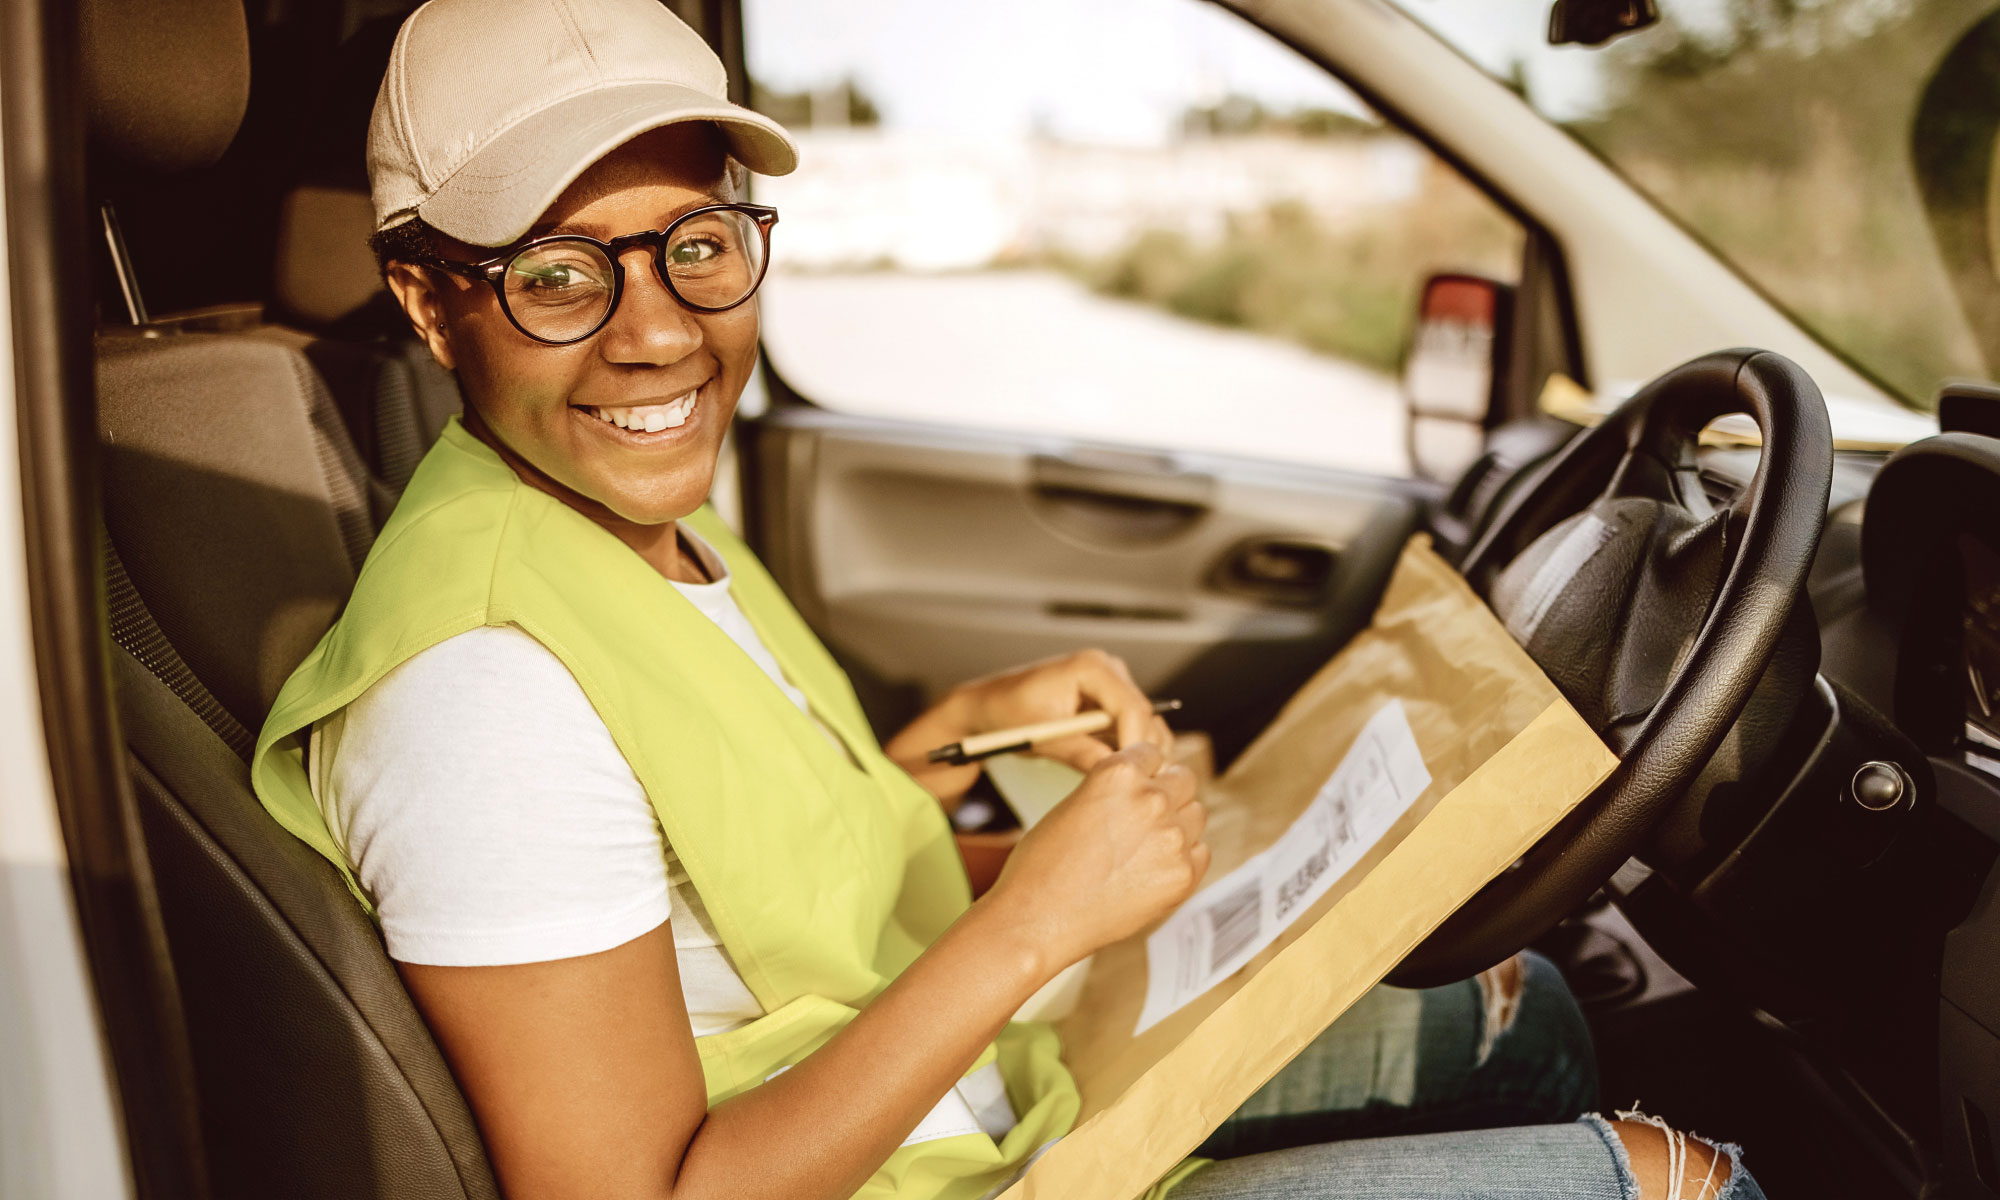 Woman holding a parcel while smiling and looking at the camera in the front seat of a van